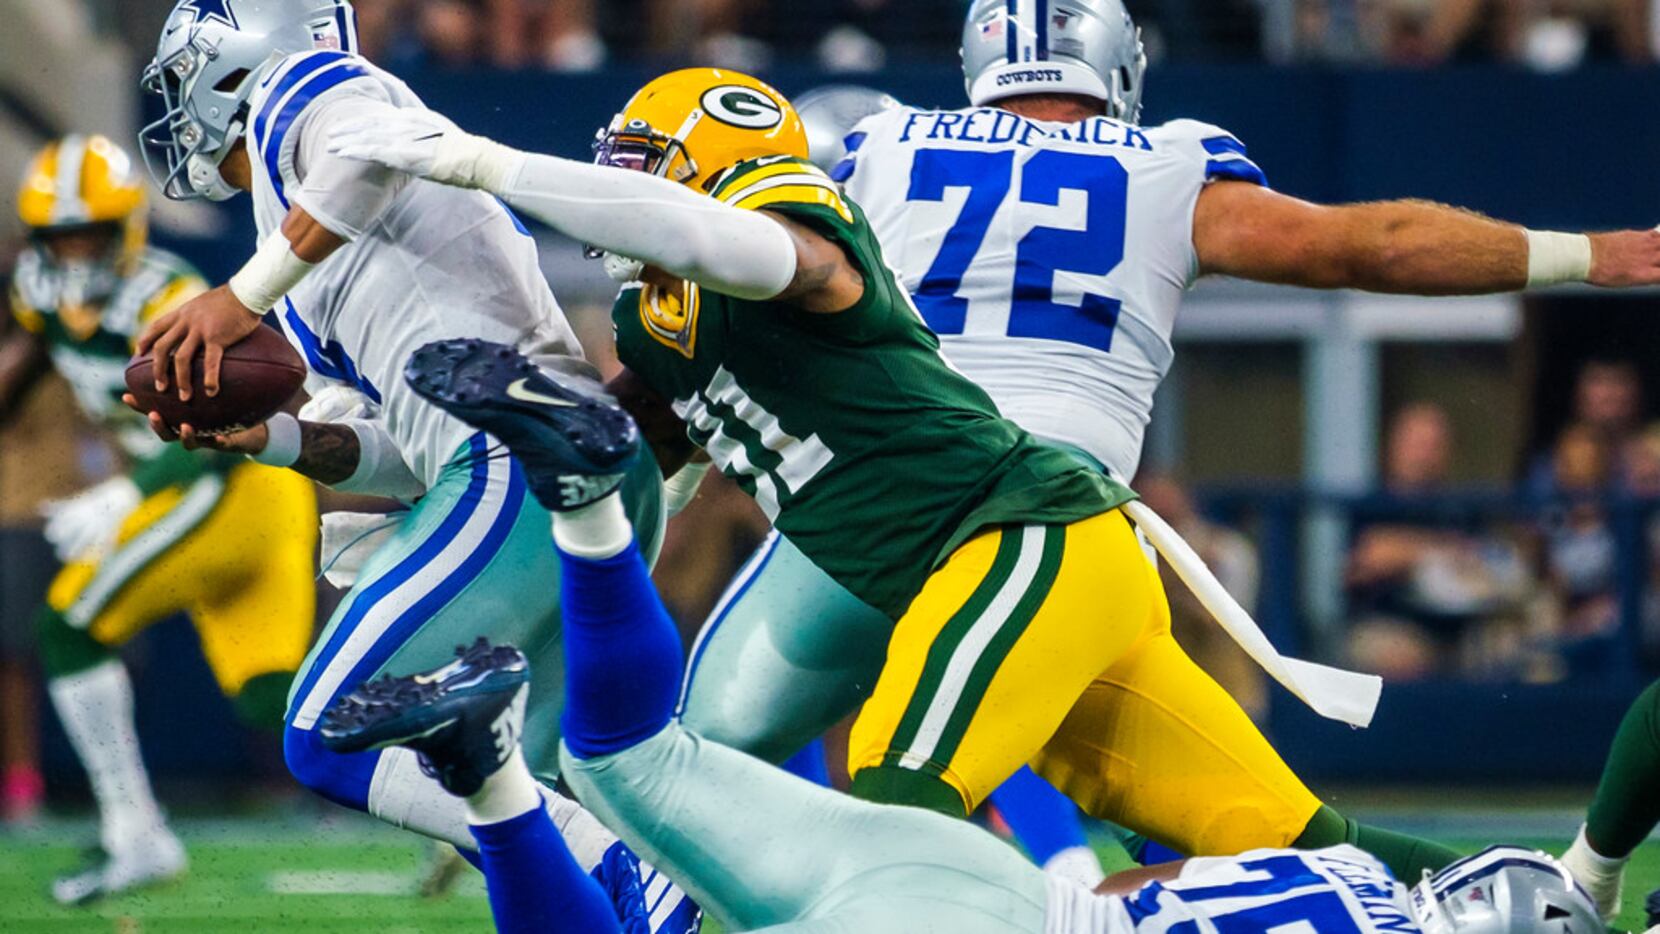 National reaction to Cowboys-Packers: 'Refs need to burn this tape